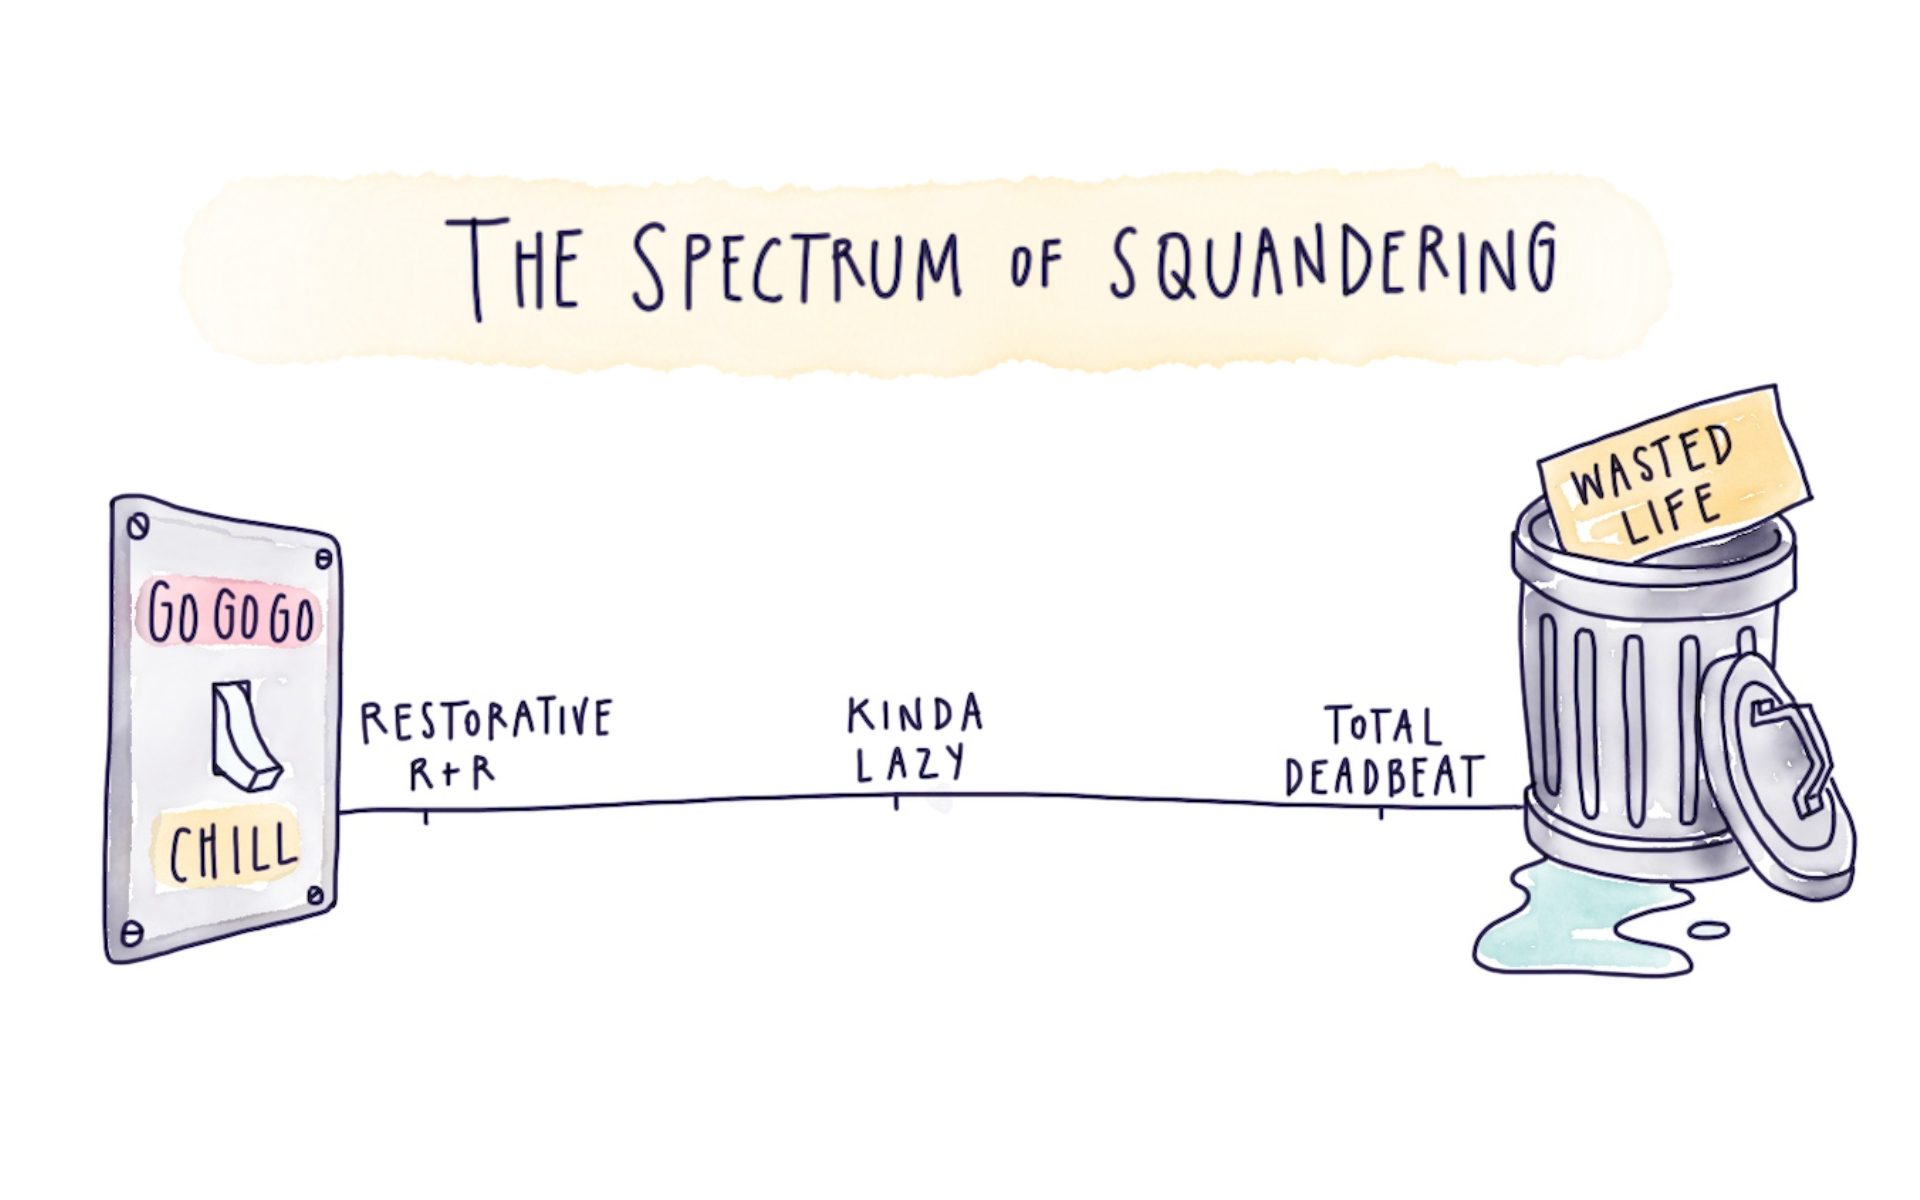 Finding Your Optimal Zone of Life-Squandering